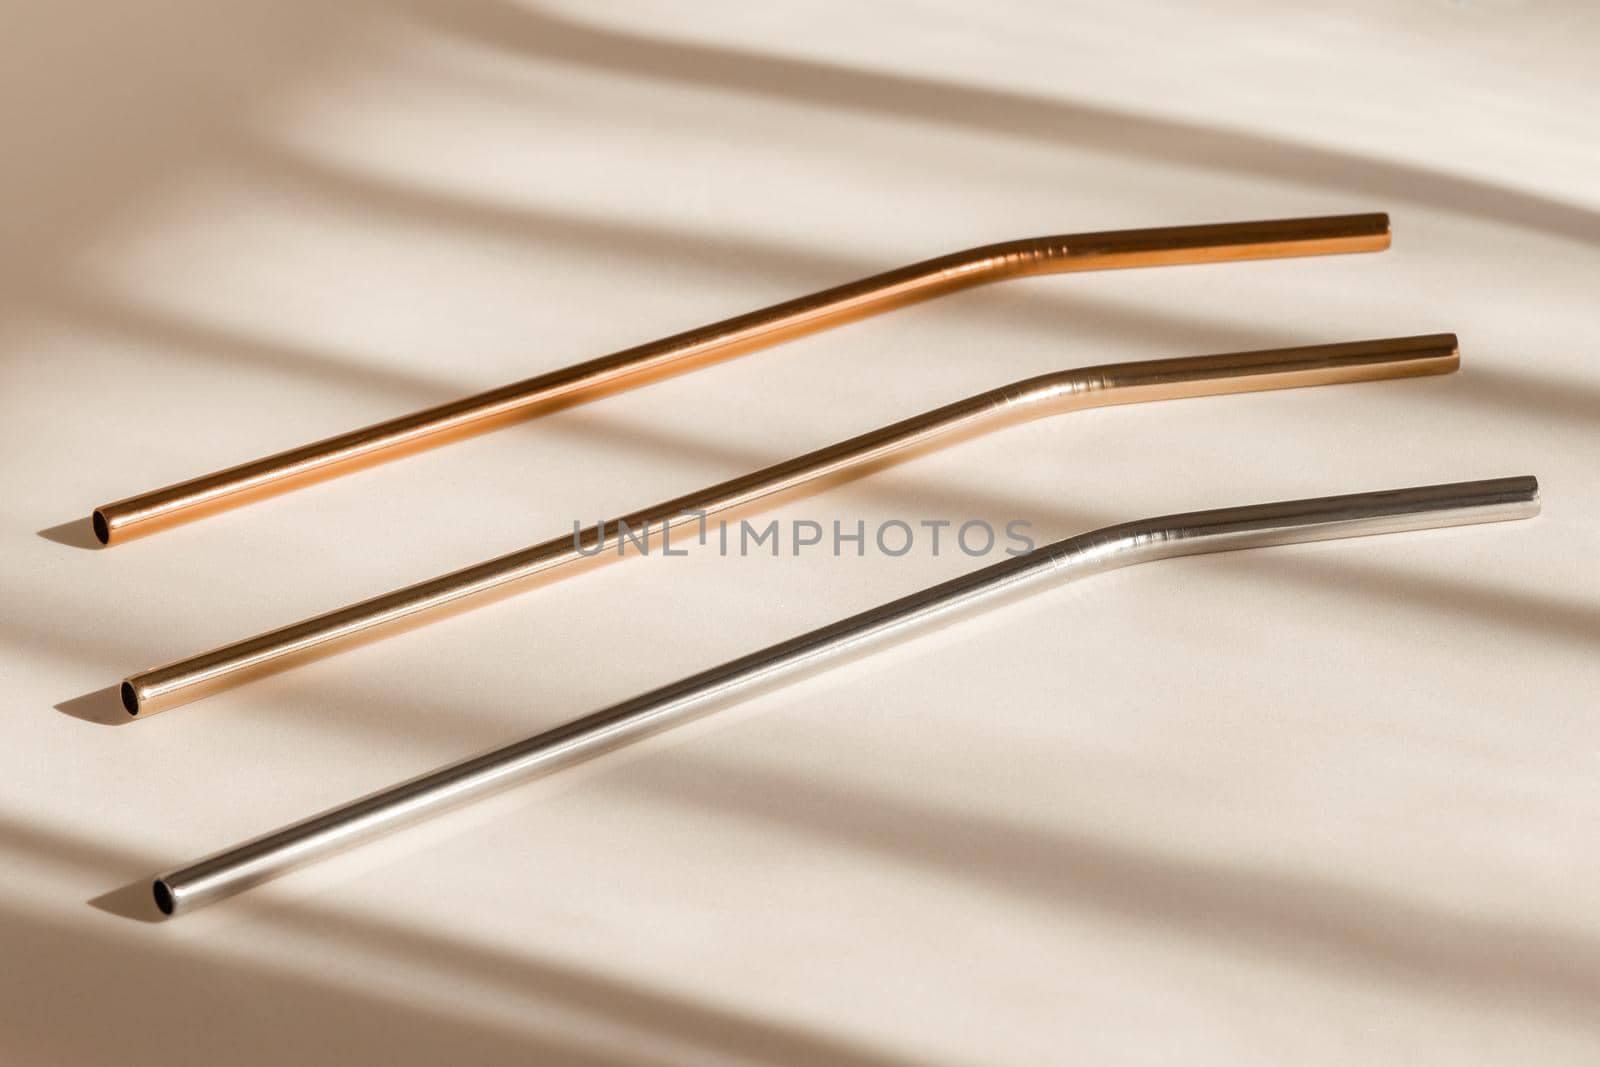 Sustainability concept. Eco friendly drinking straws from aluminium or stainless steel, reusable zero waste metal straw on neutral beige background with shadow from room windows, high angle view.